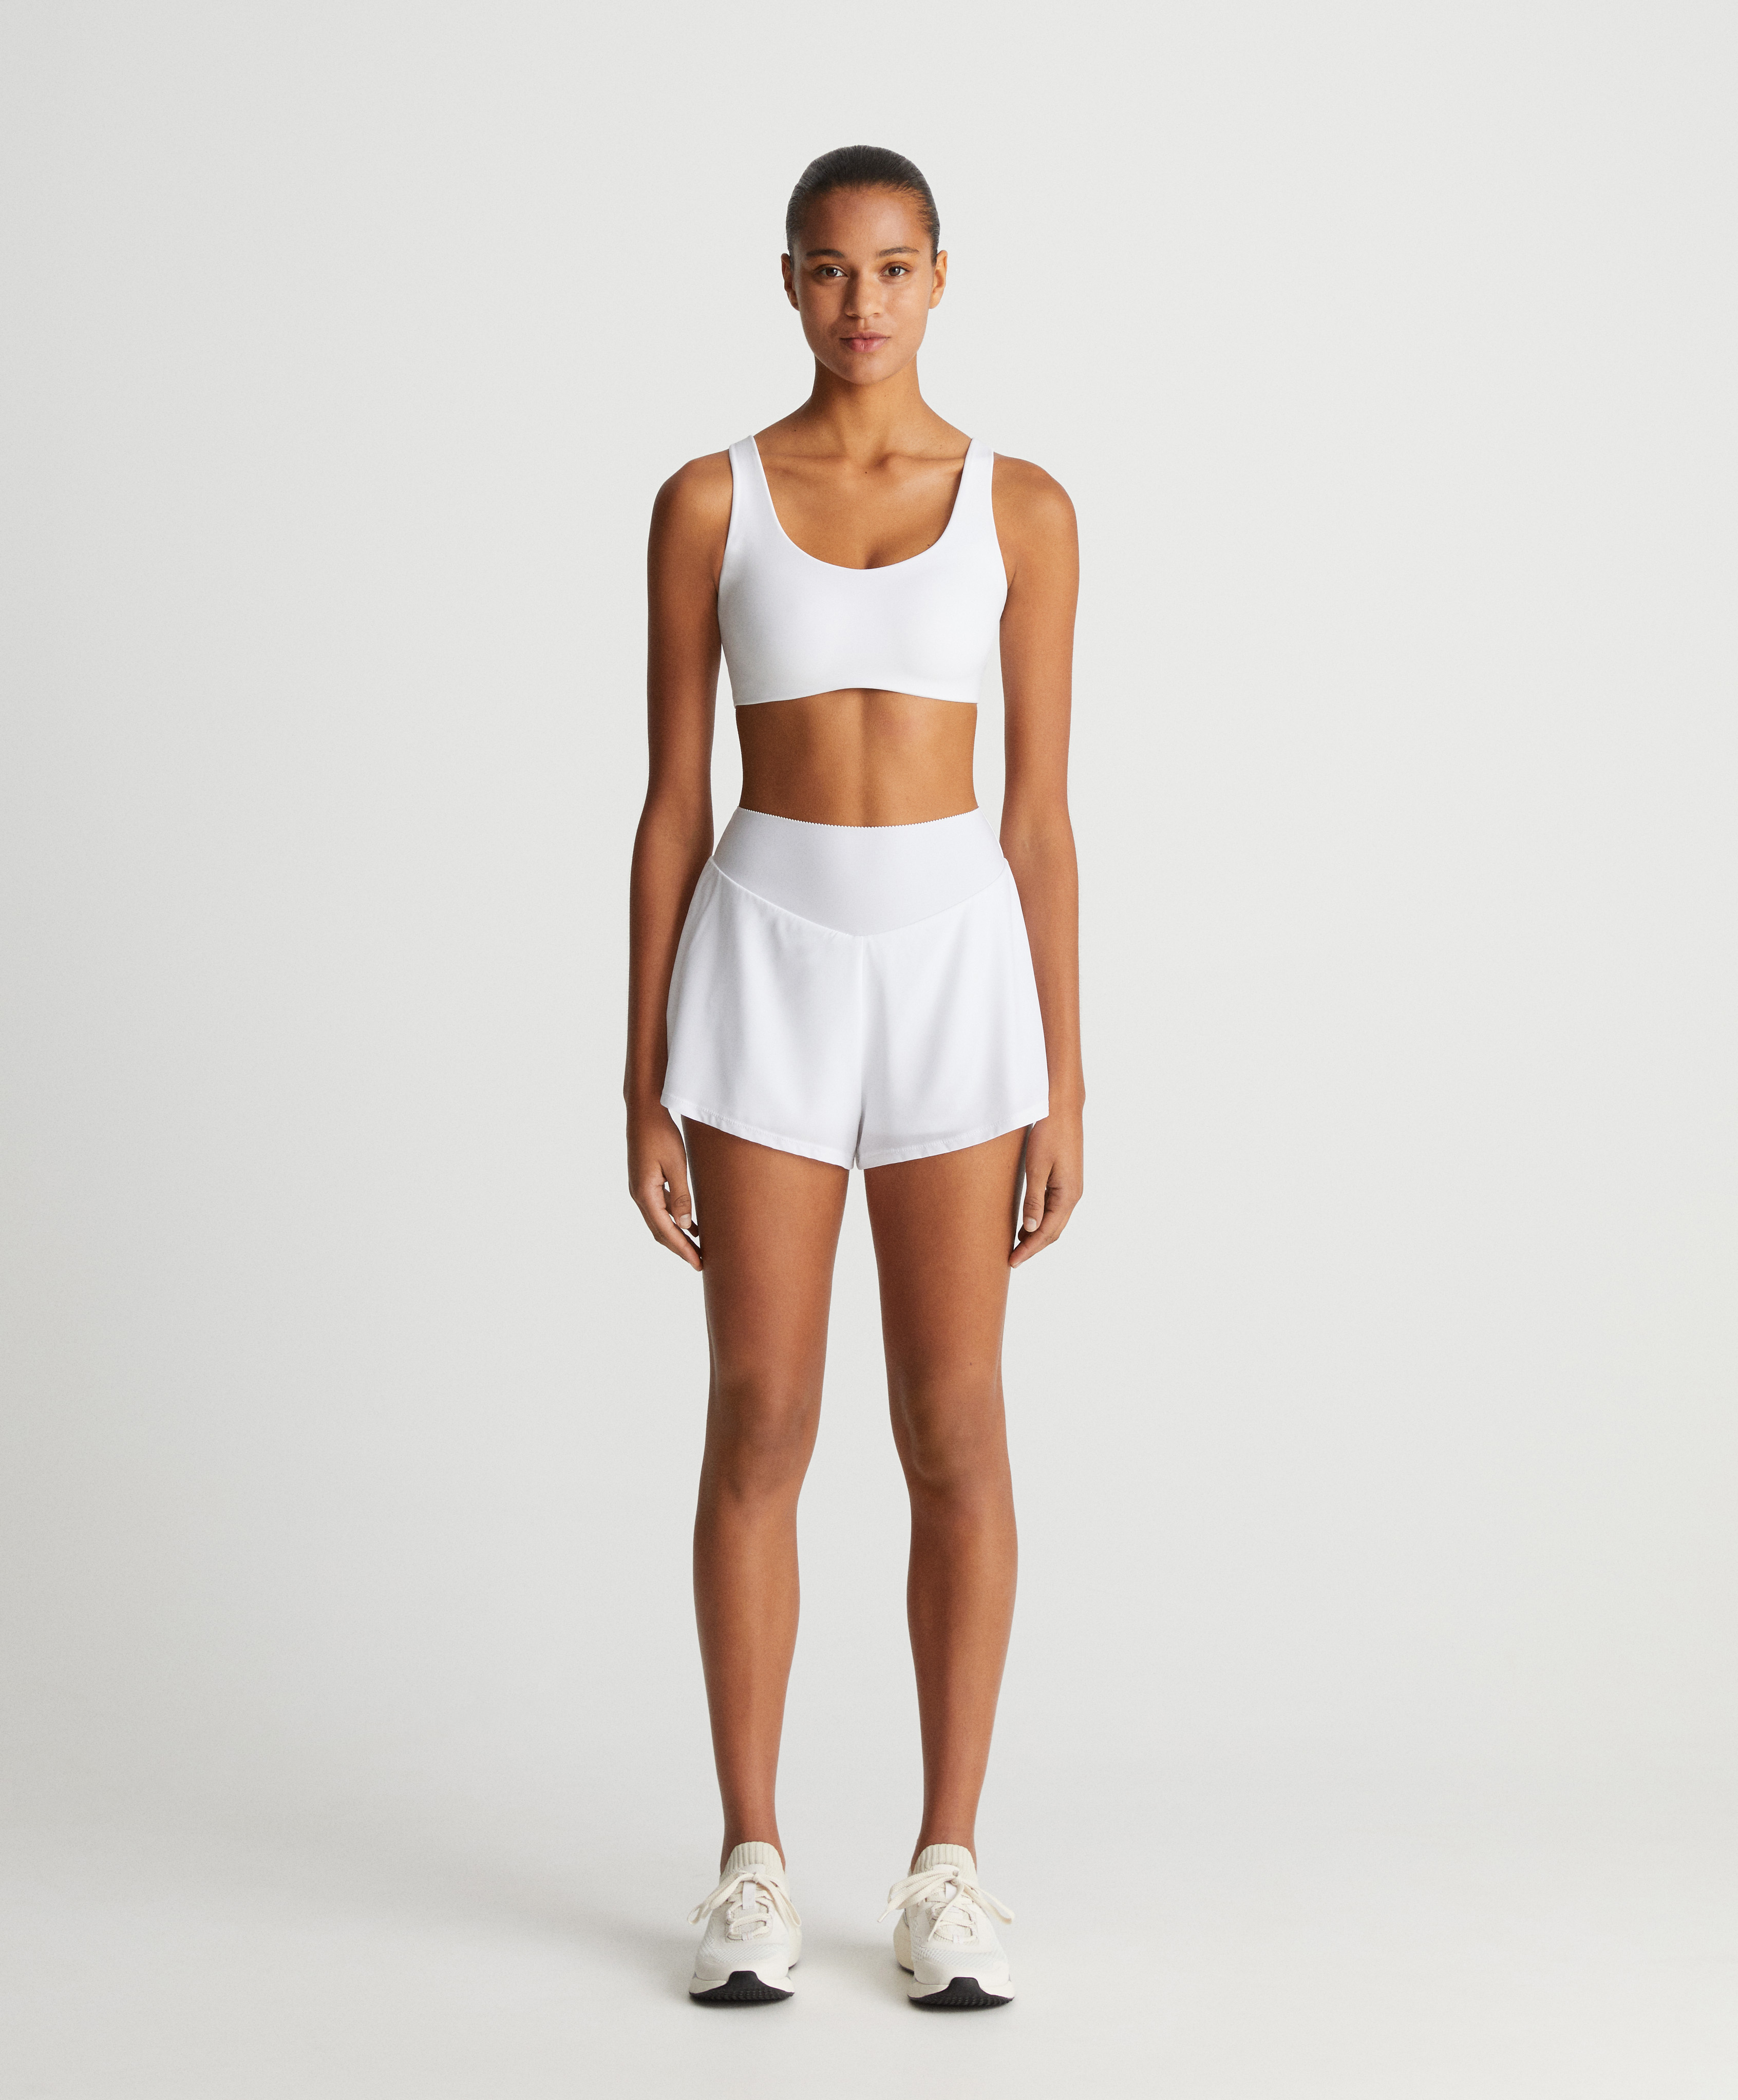 White compressive shorts total look